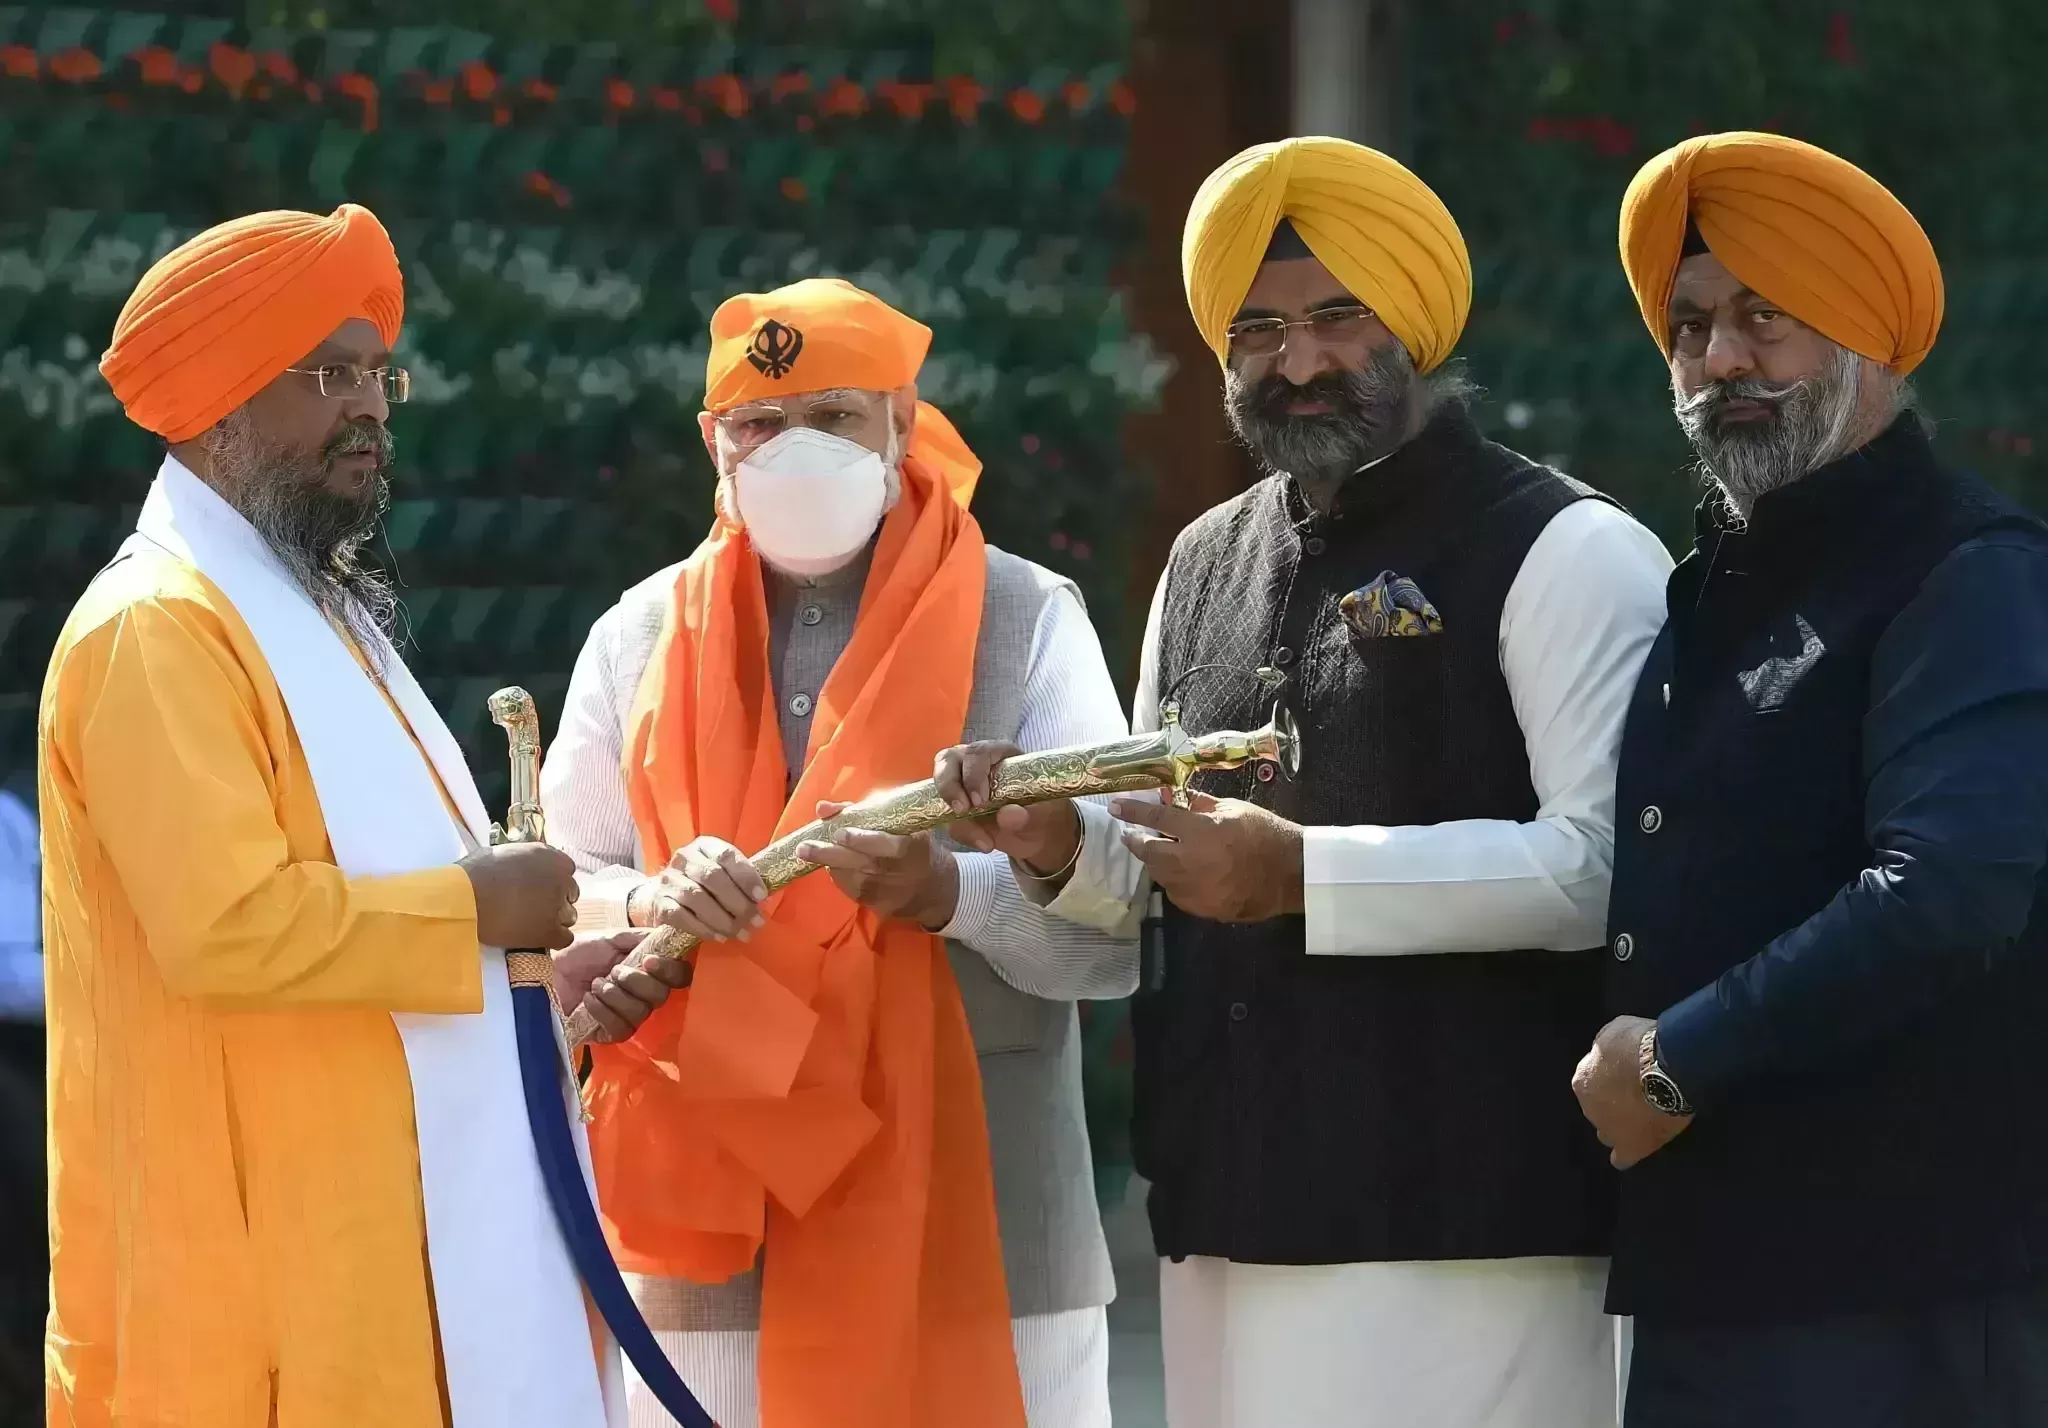 Ahead of Punjab polls, PM Modi hosts prominent Sikhs at his residence in Delhi